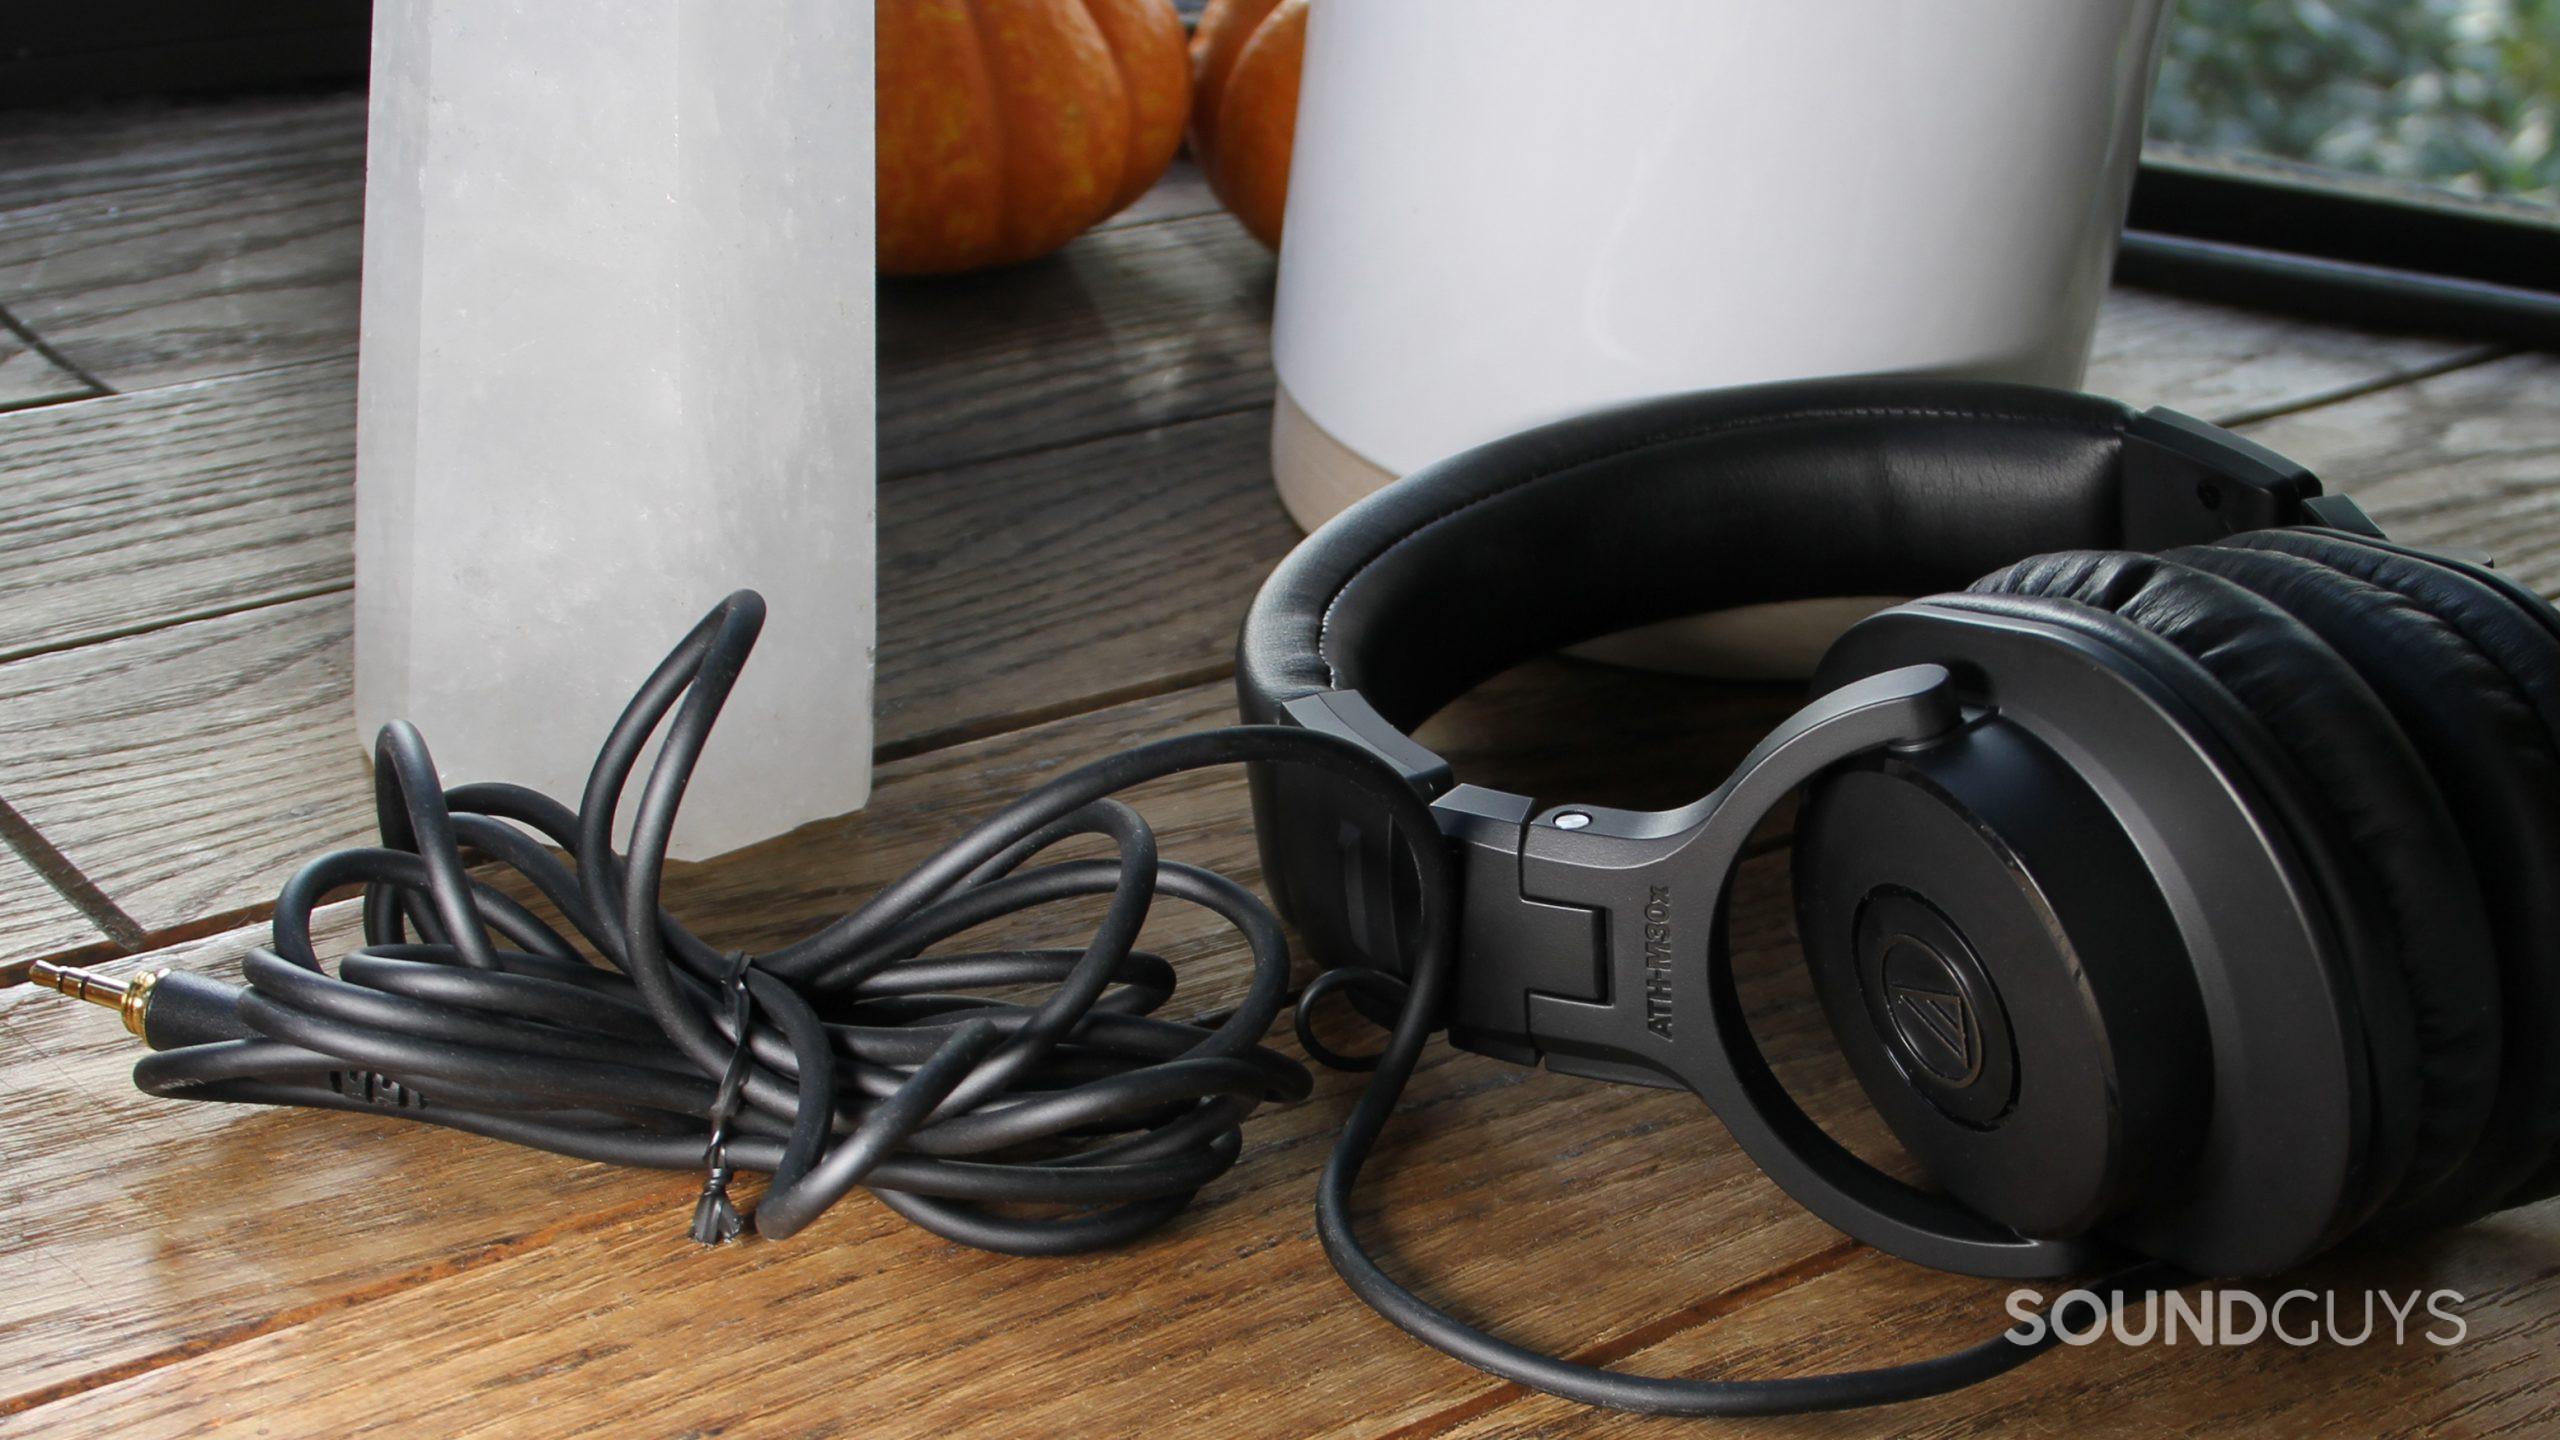 The Audio-Technica ATH-M30x resting on a wood surface with the cable folded up.